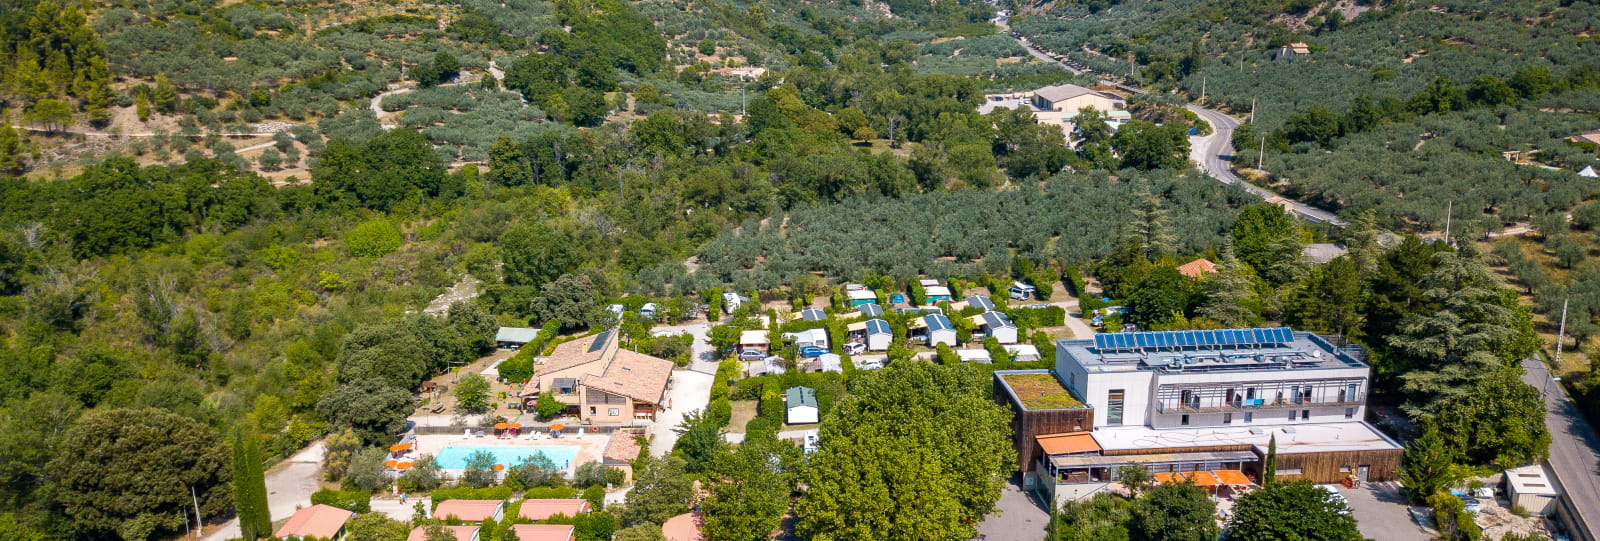 Camping La Fontaine d'Annibal